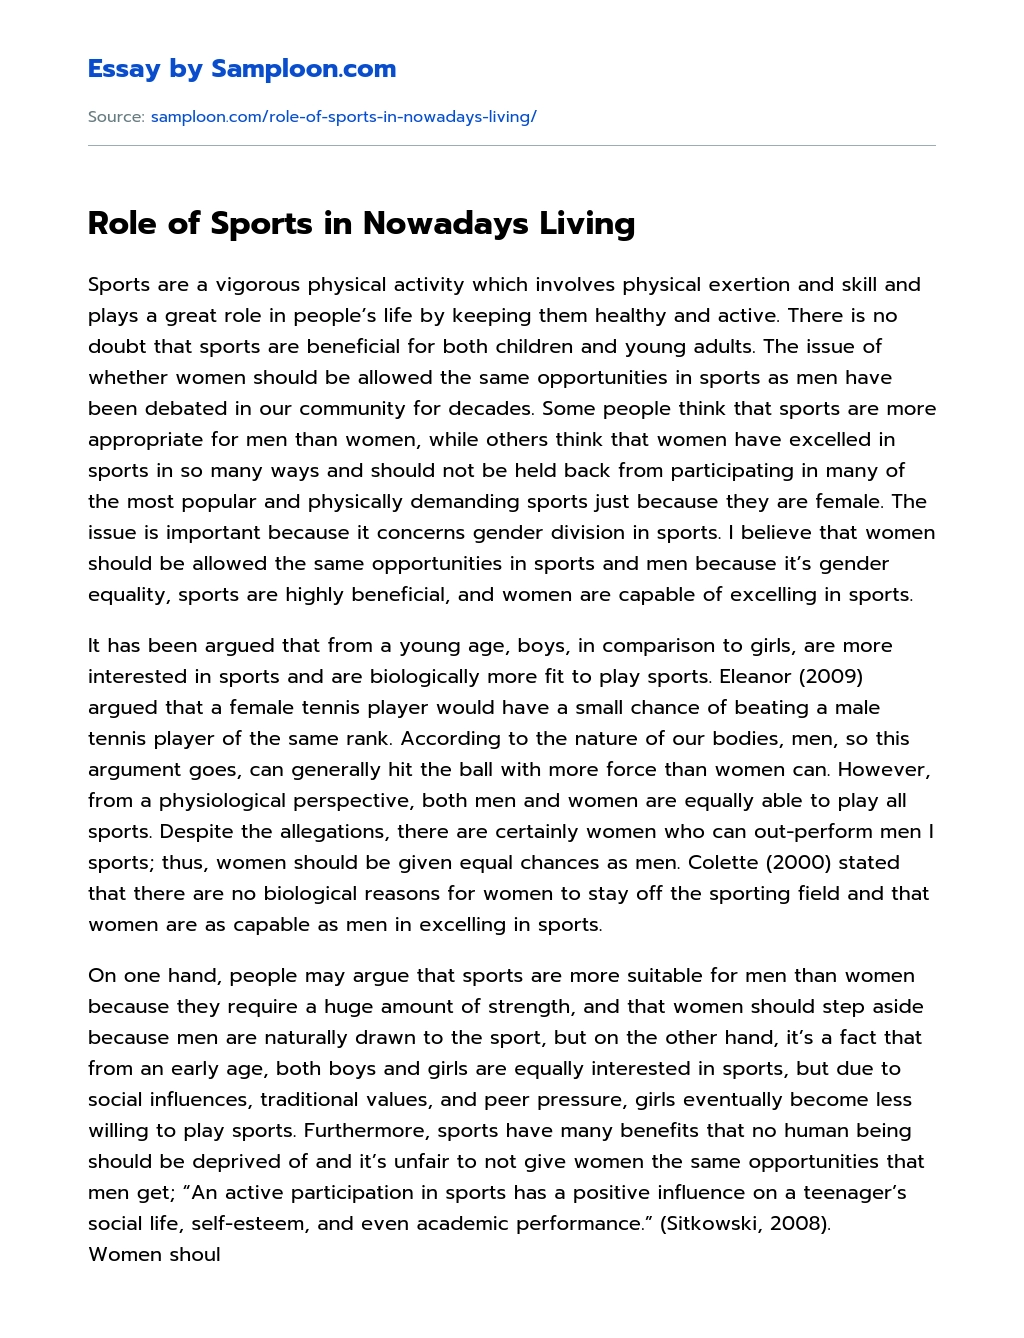 Role of Sports in Nowadays Living essay